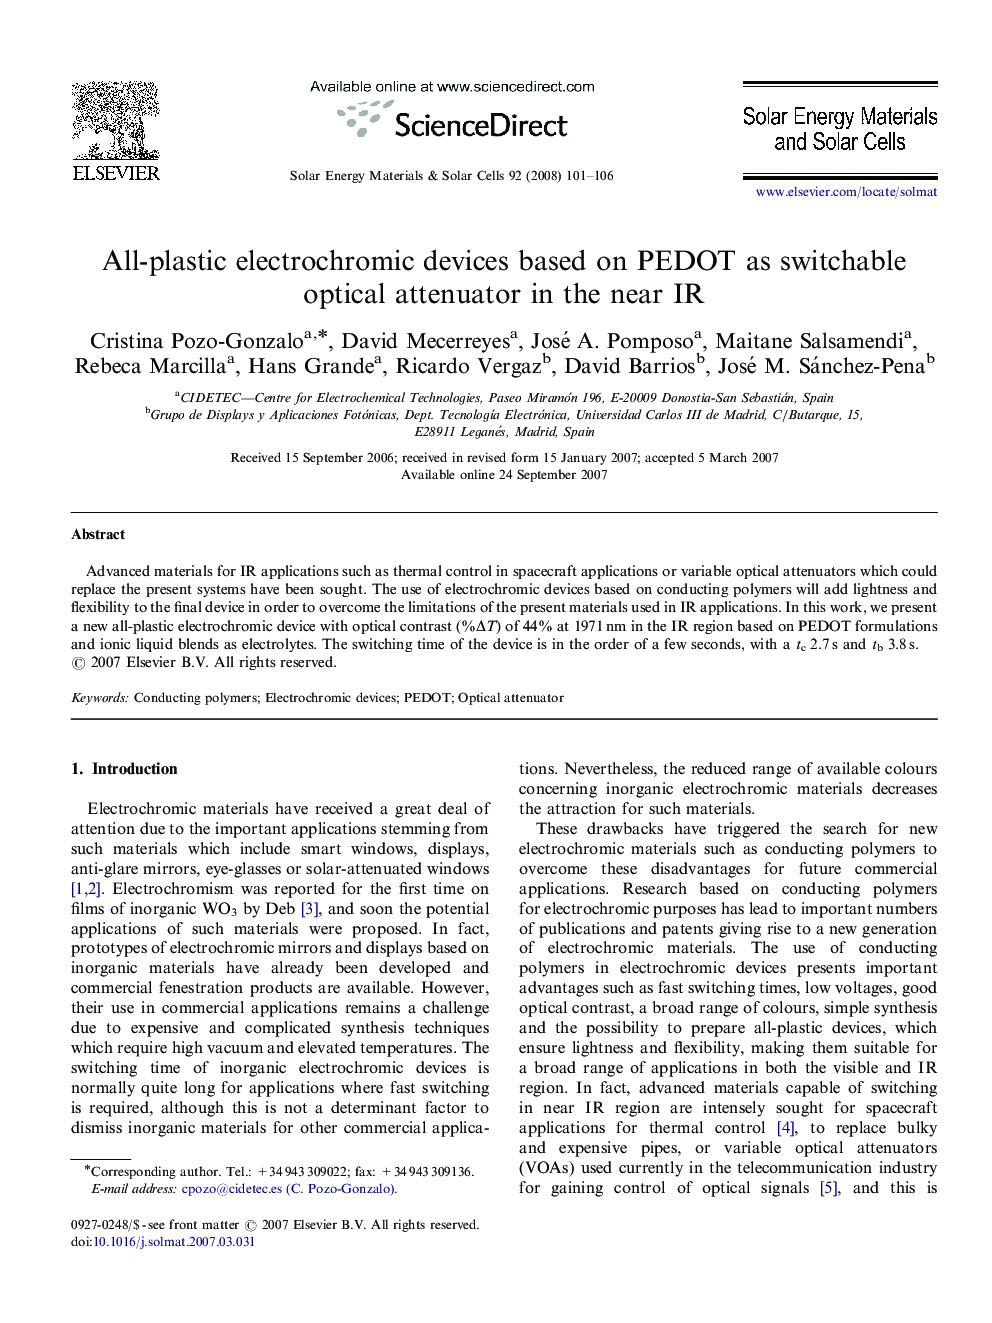 All-plastic electrochromic devices based on PEDOT as switchable optical attenuator in the near IR